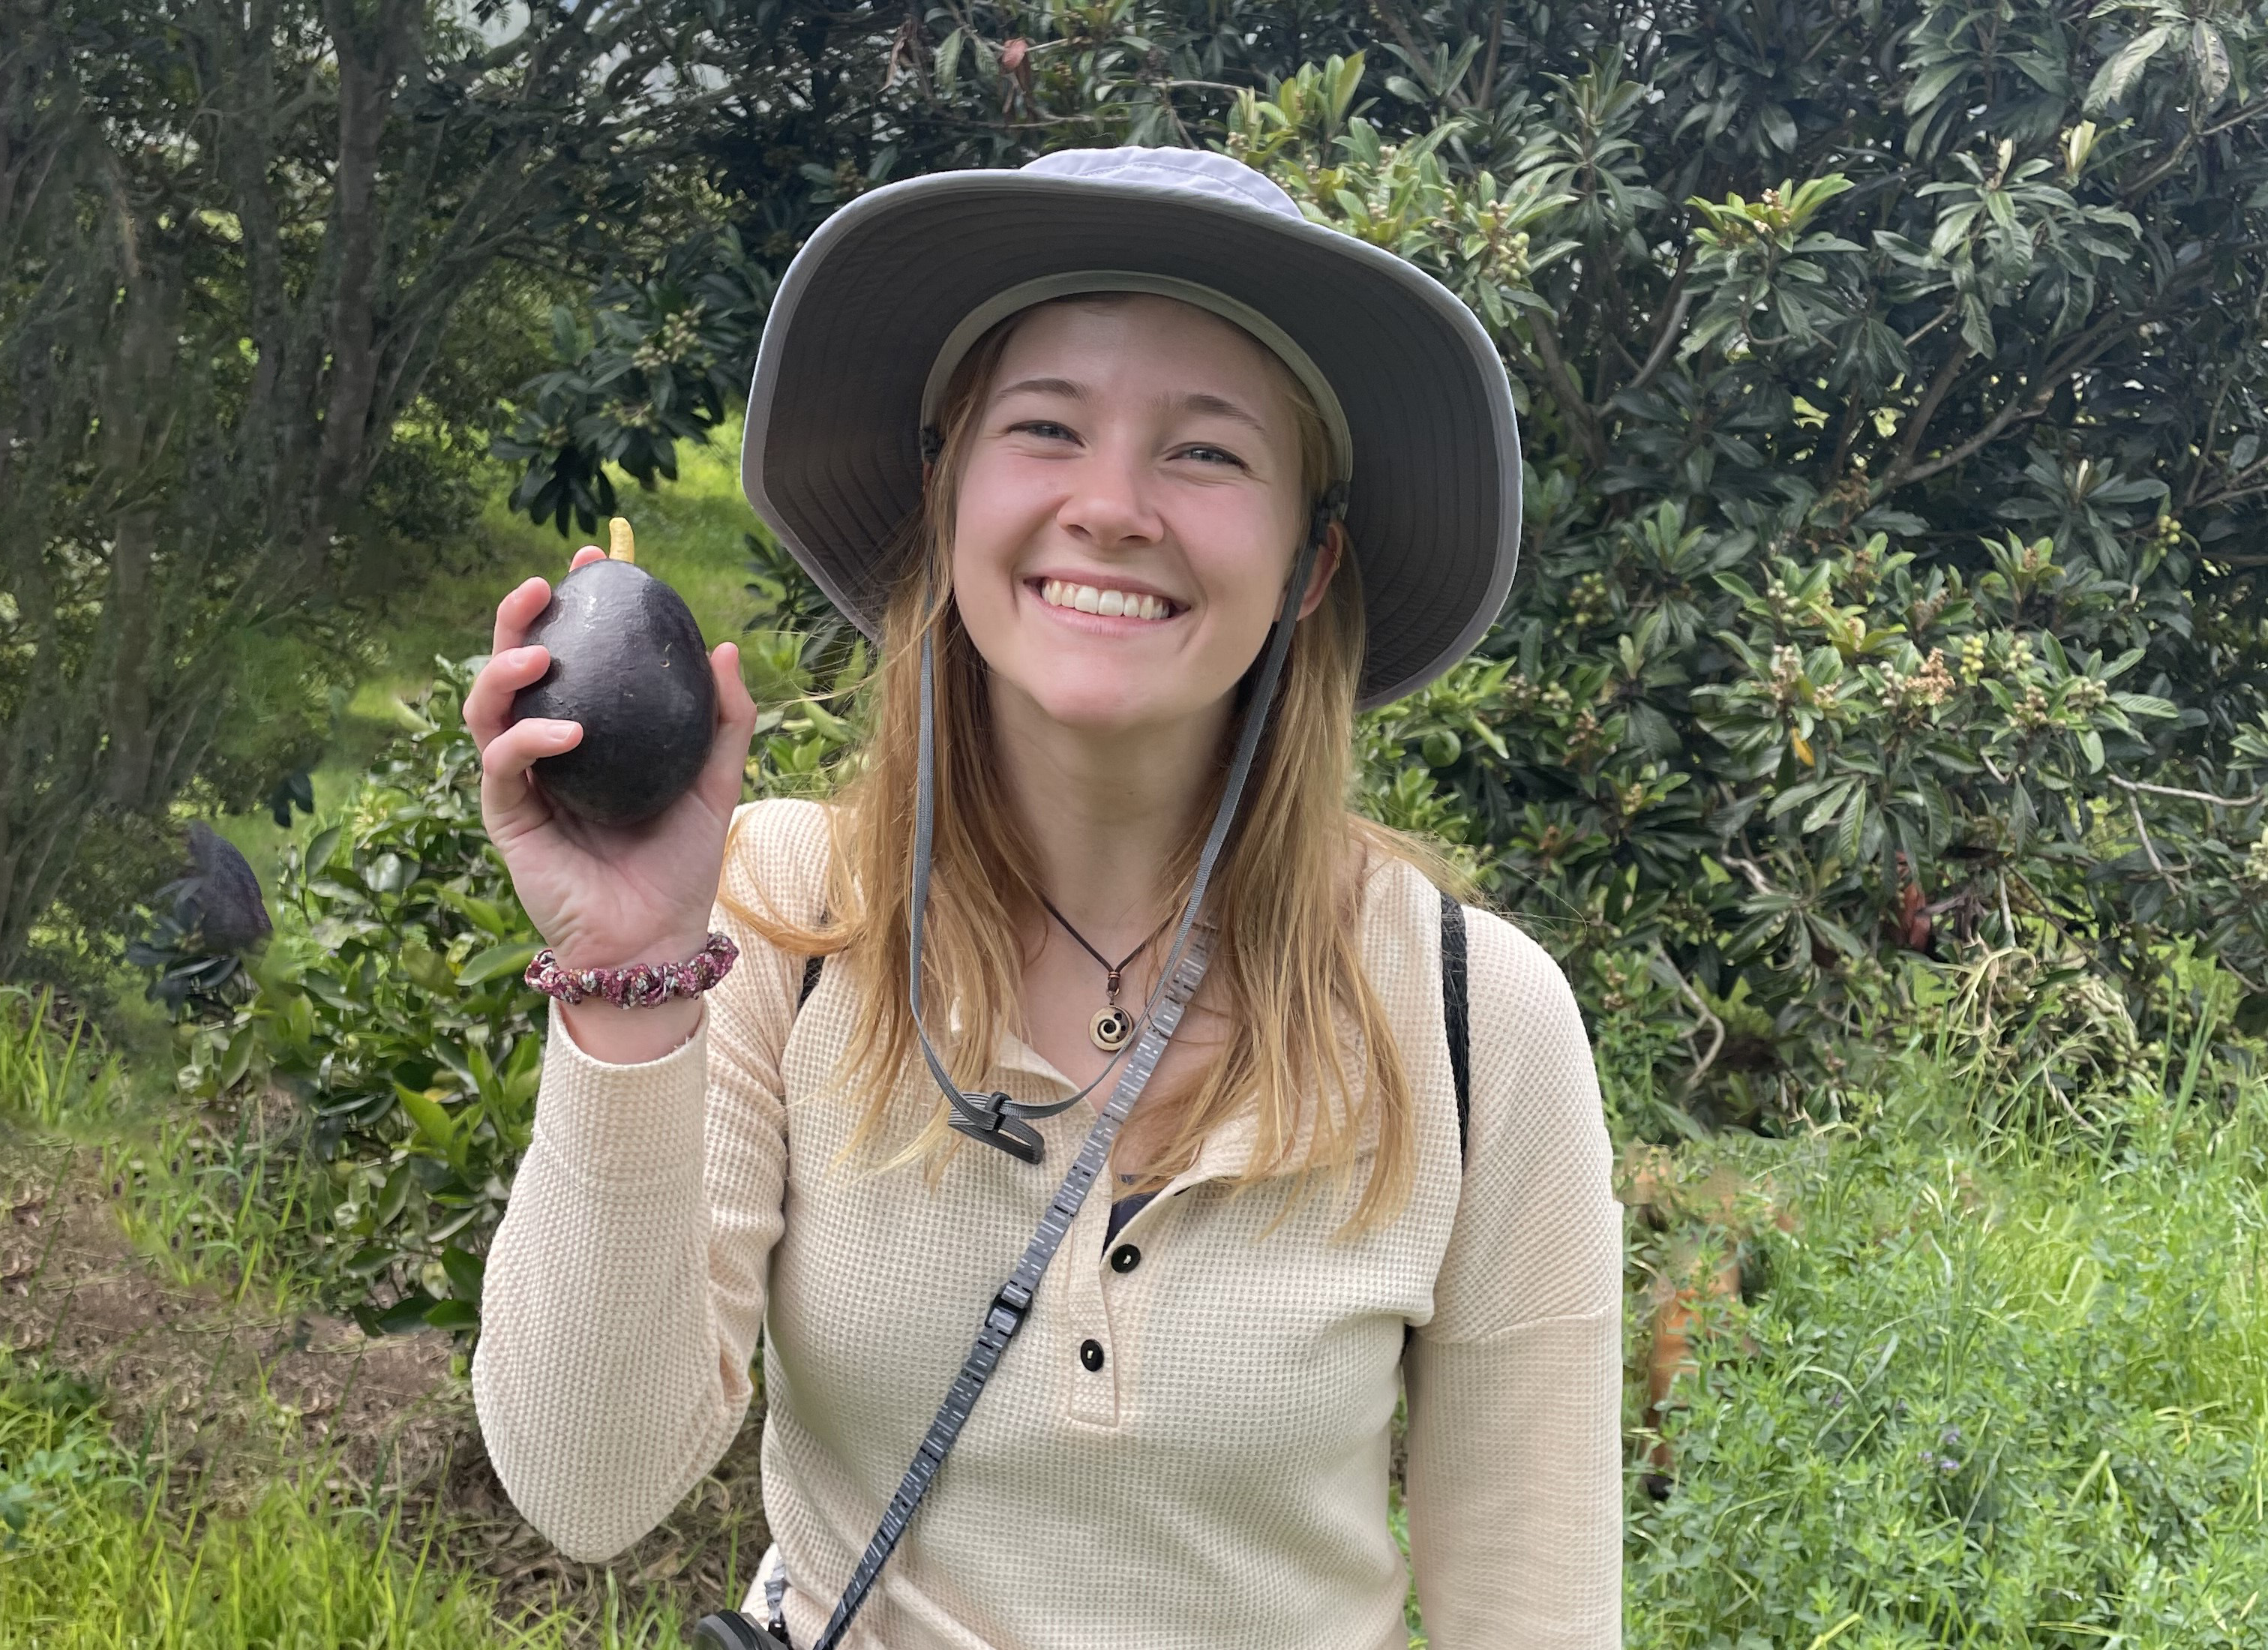 Alexa Marshall harvesting avocados at Hacienda Verde, a permaculture farm in the Andean dry forest. Photo by Morgan Harvey for Virginia Tech.